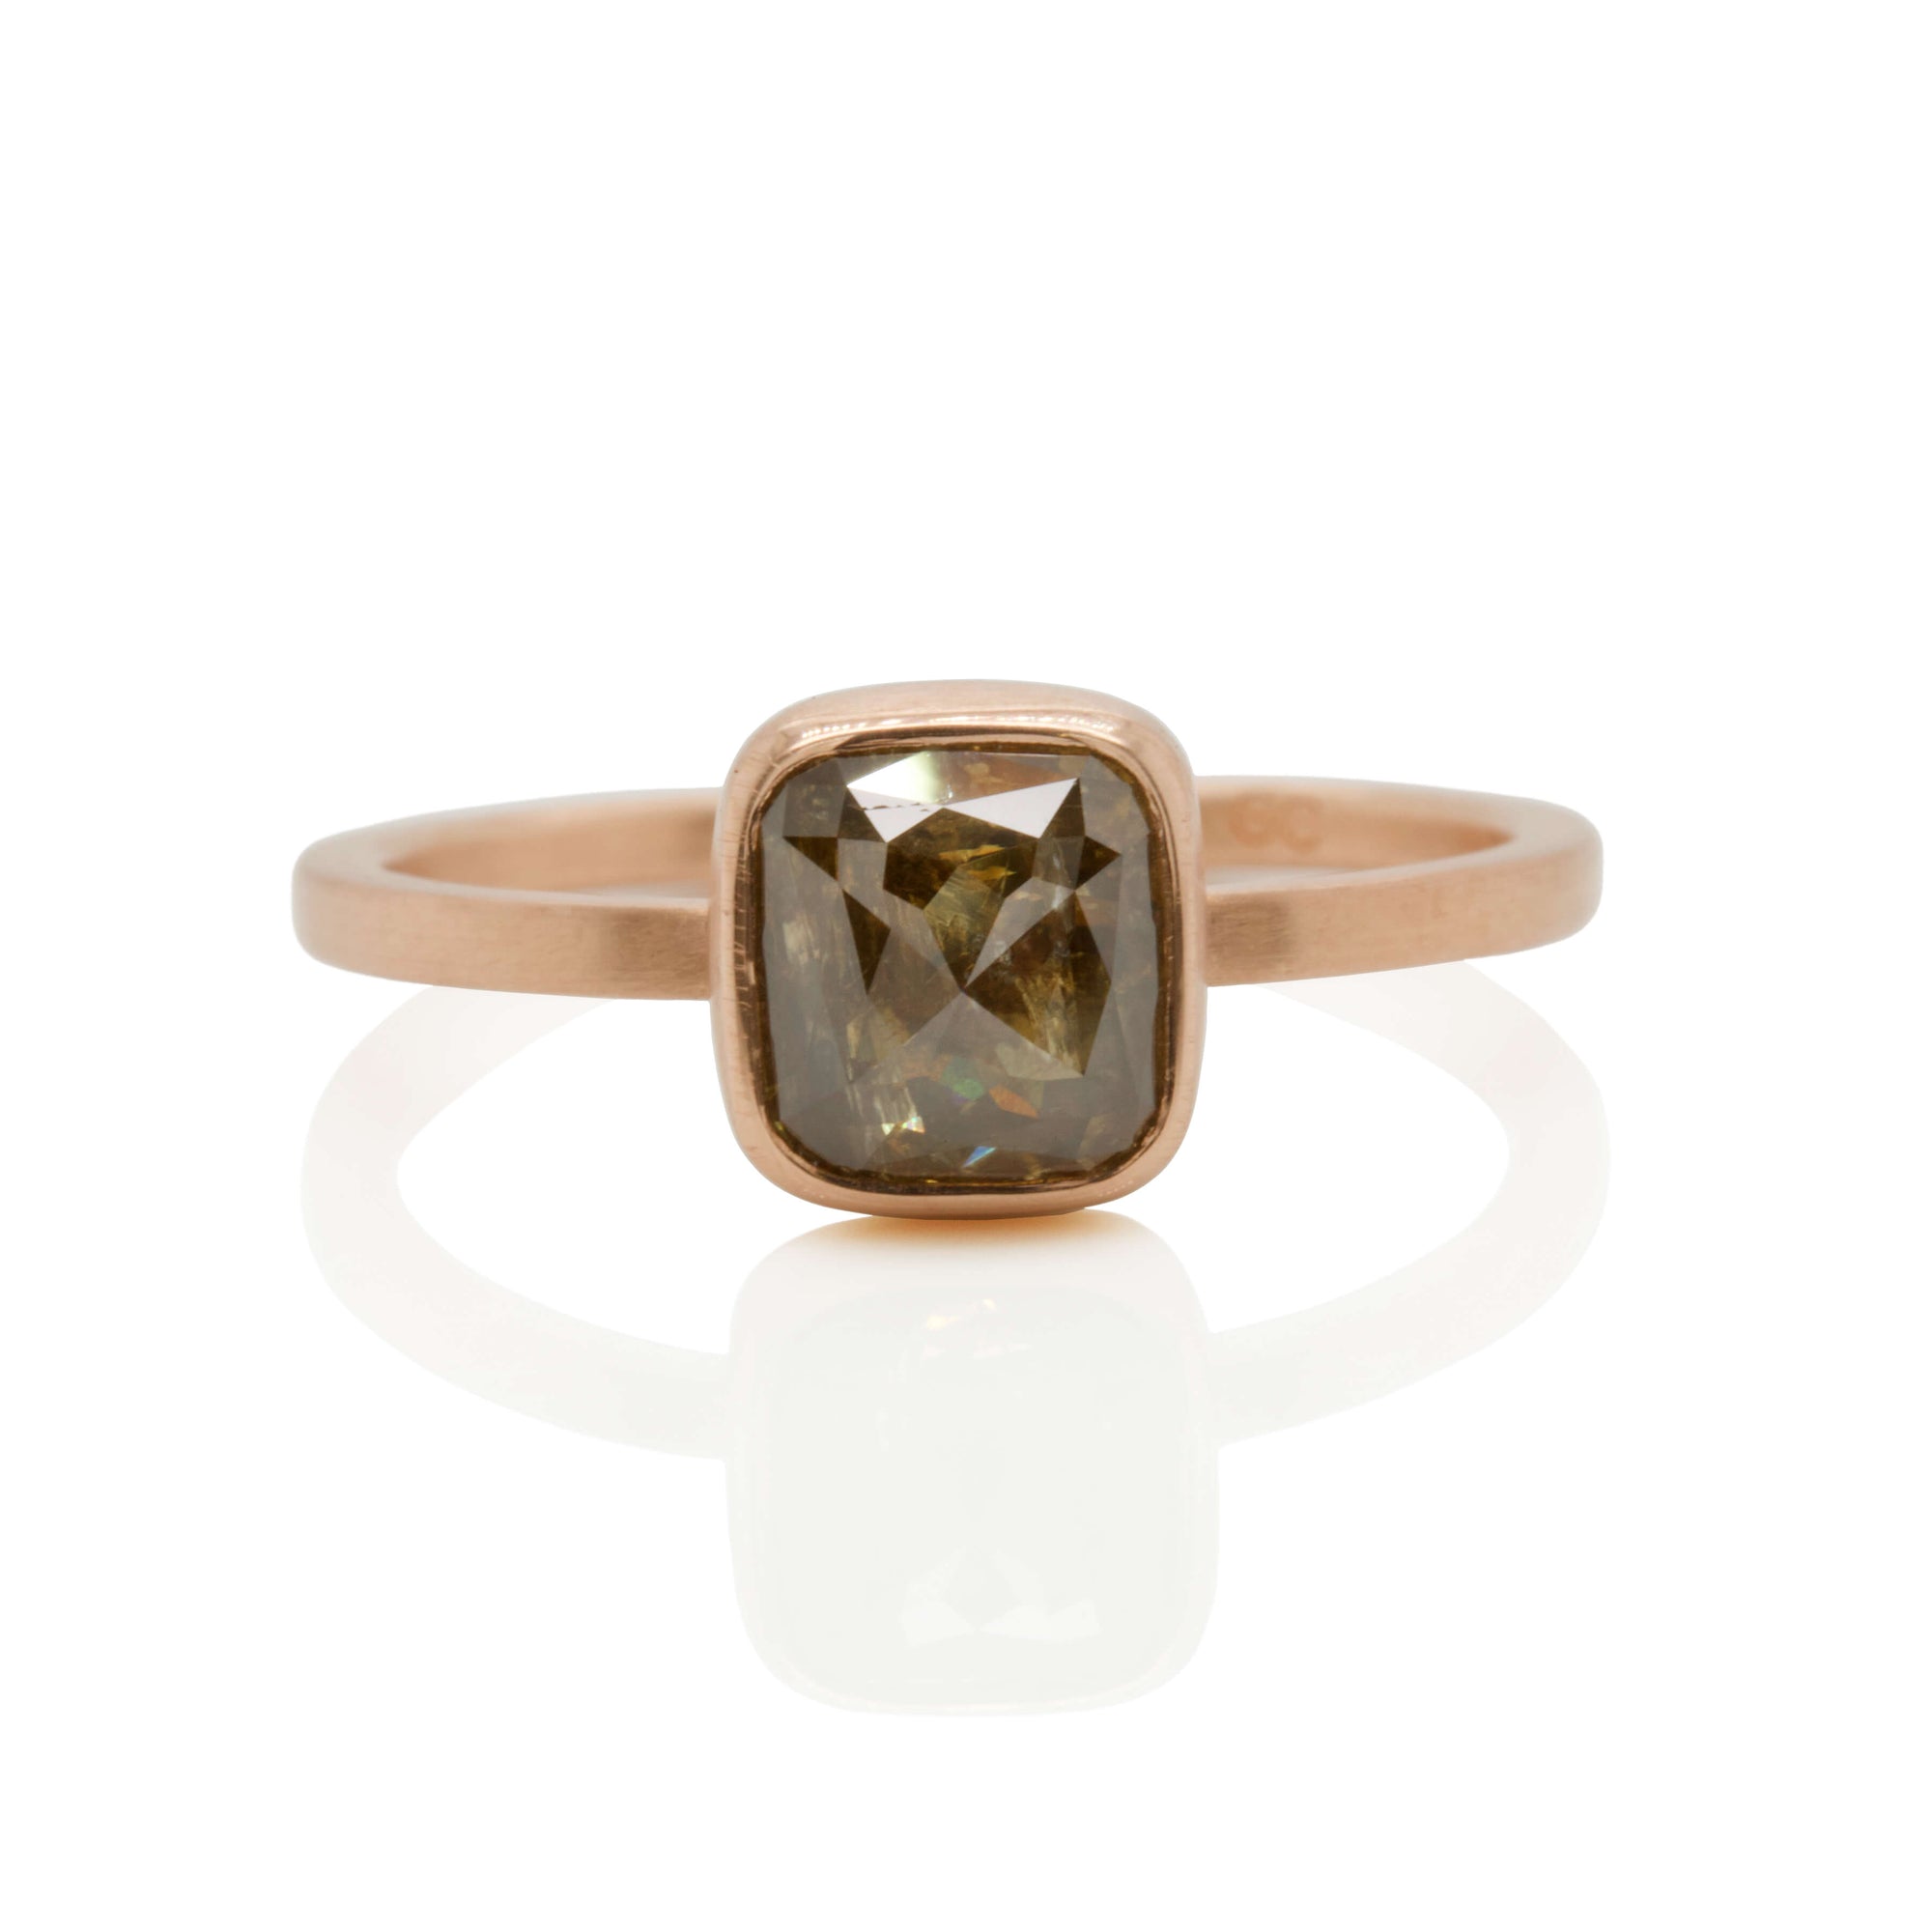 Brown diamond engagement ring in recycled rose gold. Handmade by EC Design Jewelry in MInneapolis, MN.